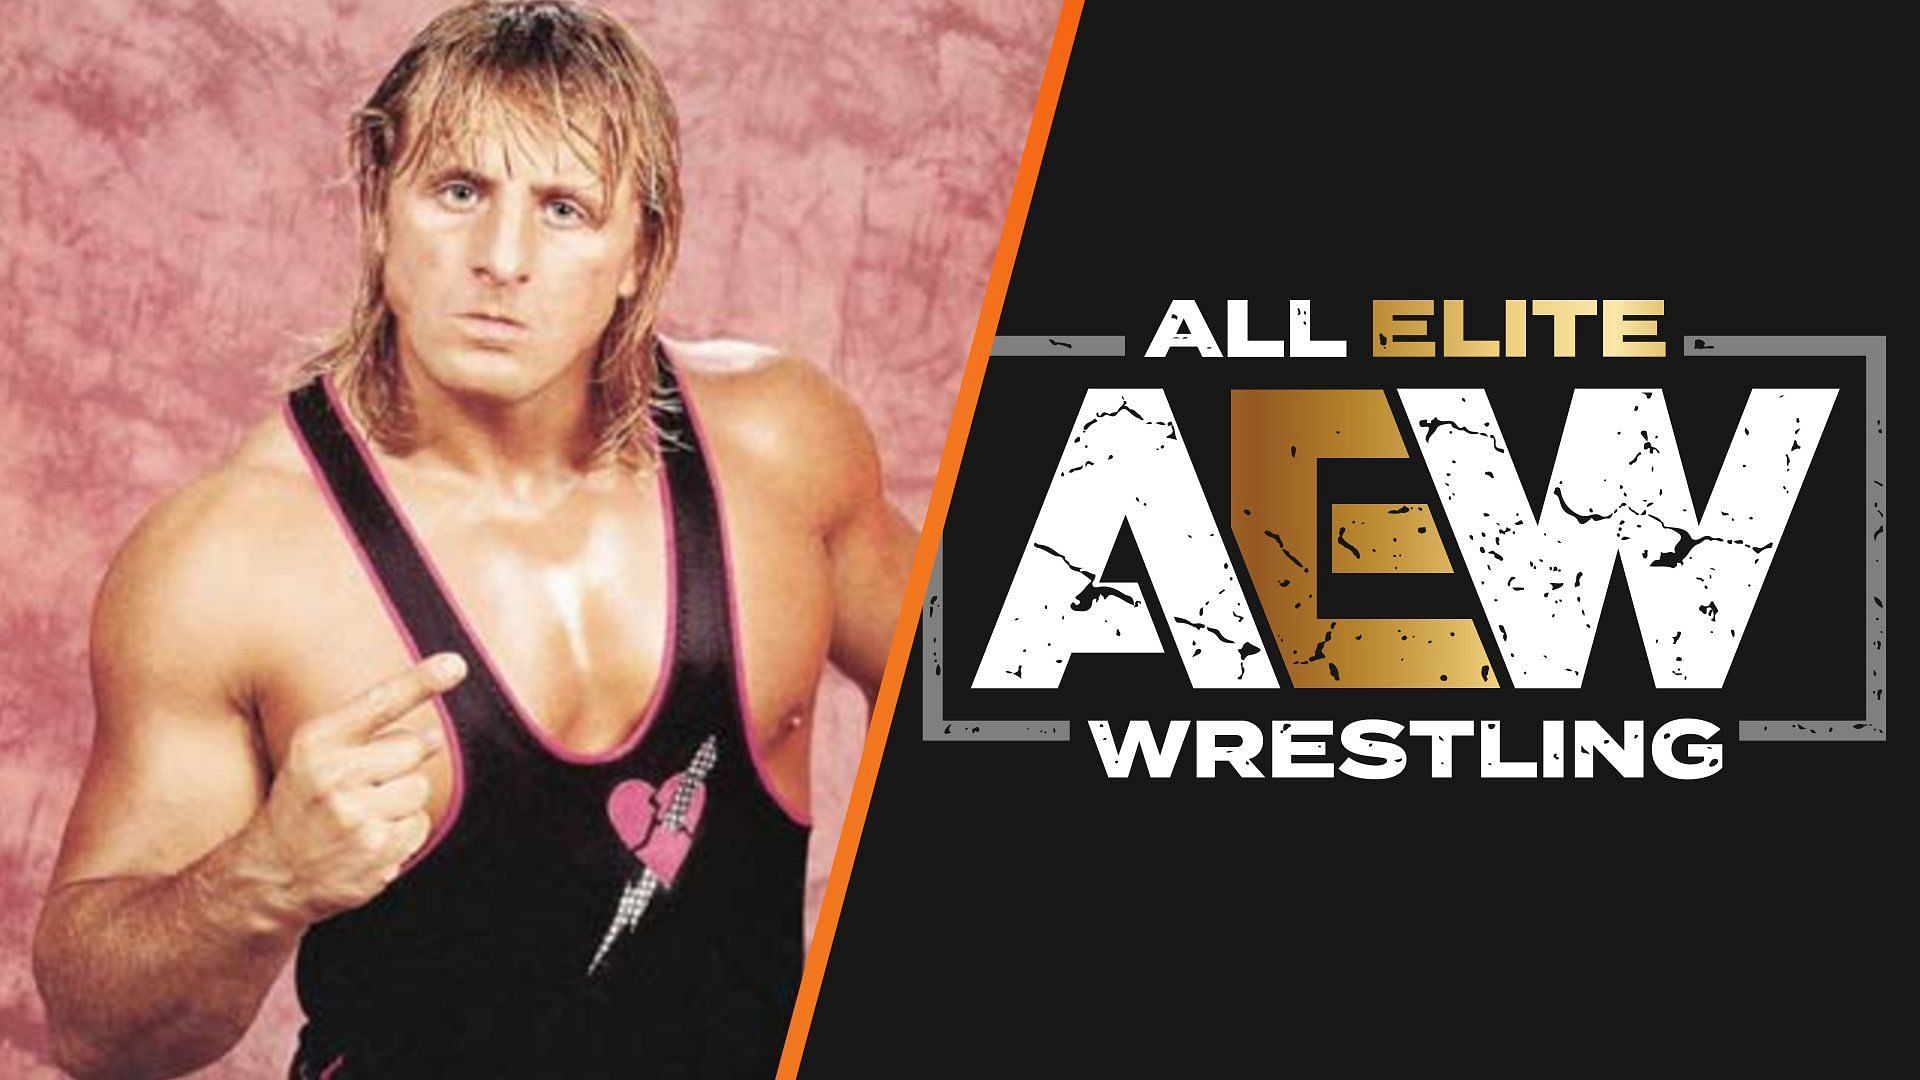 The Owen Hart Foundation Tournament is taking place in All Elite Wrestling